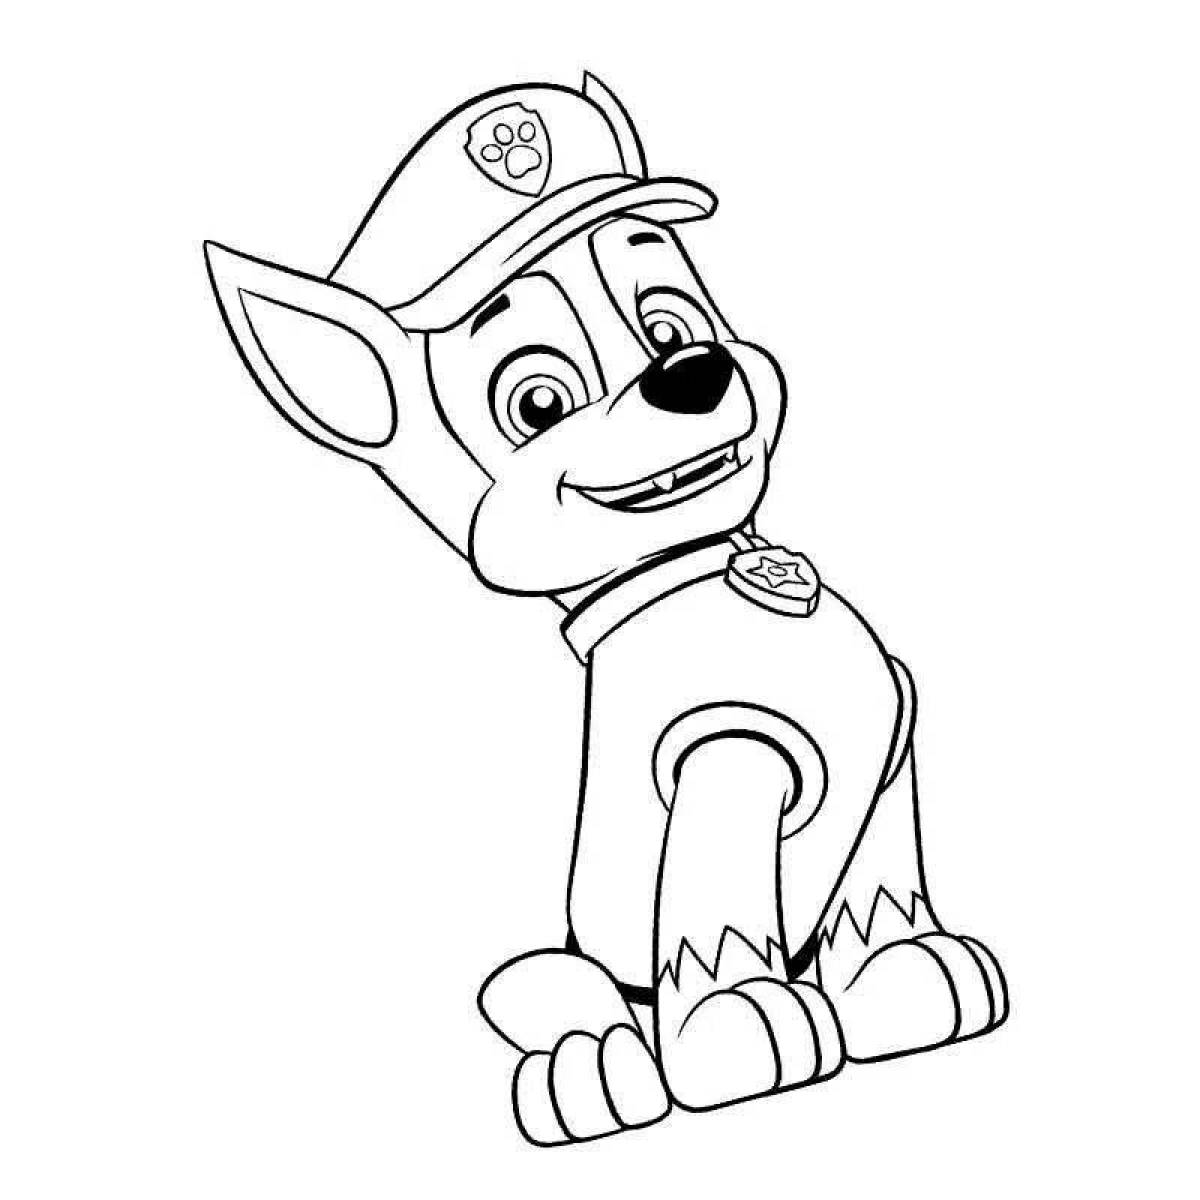 Coloring page shining racer